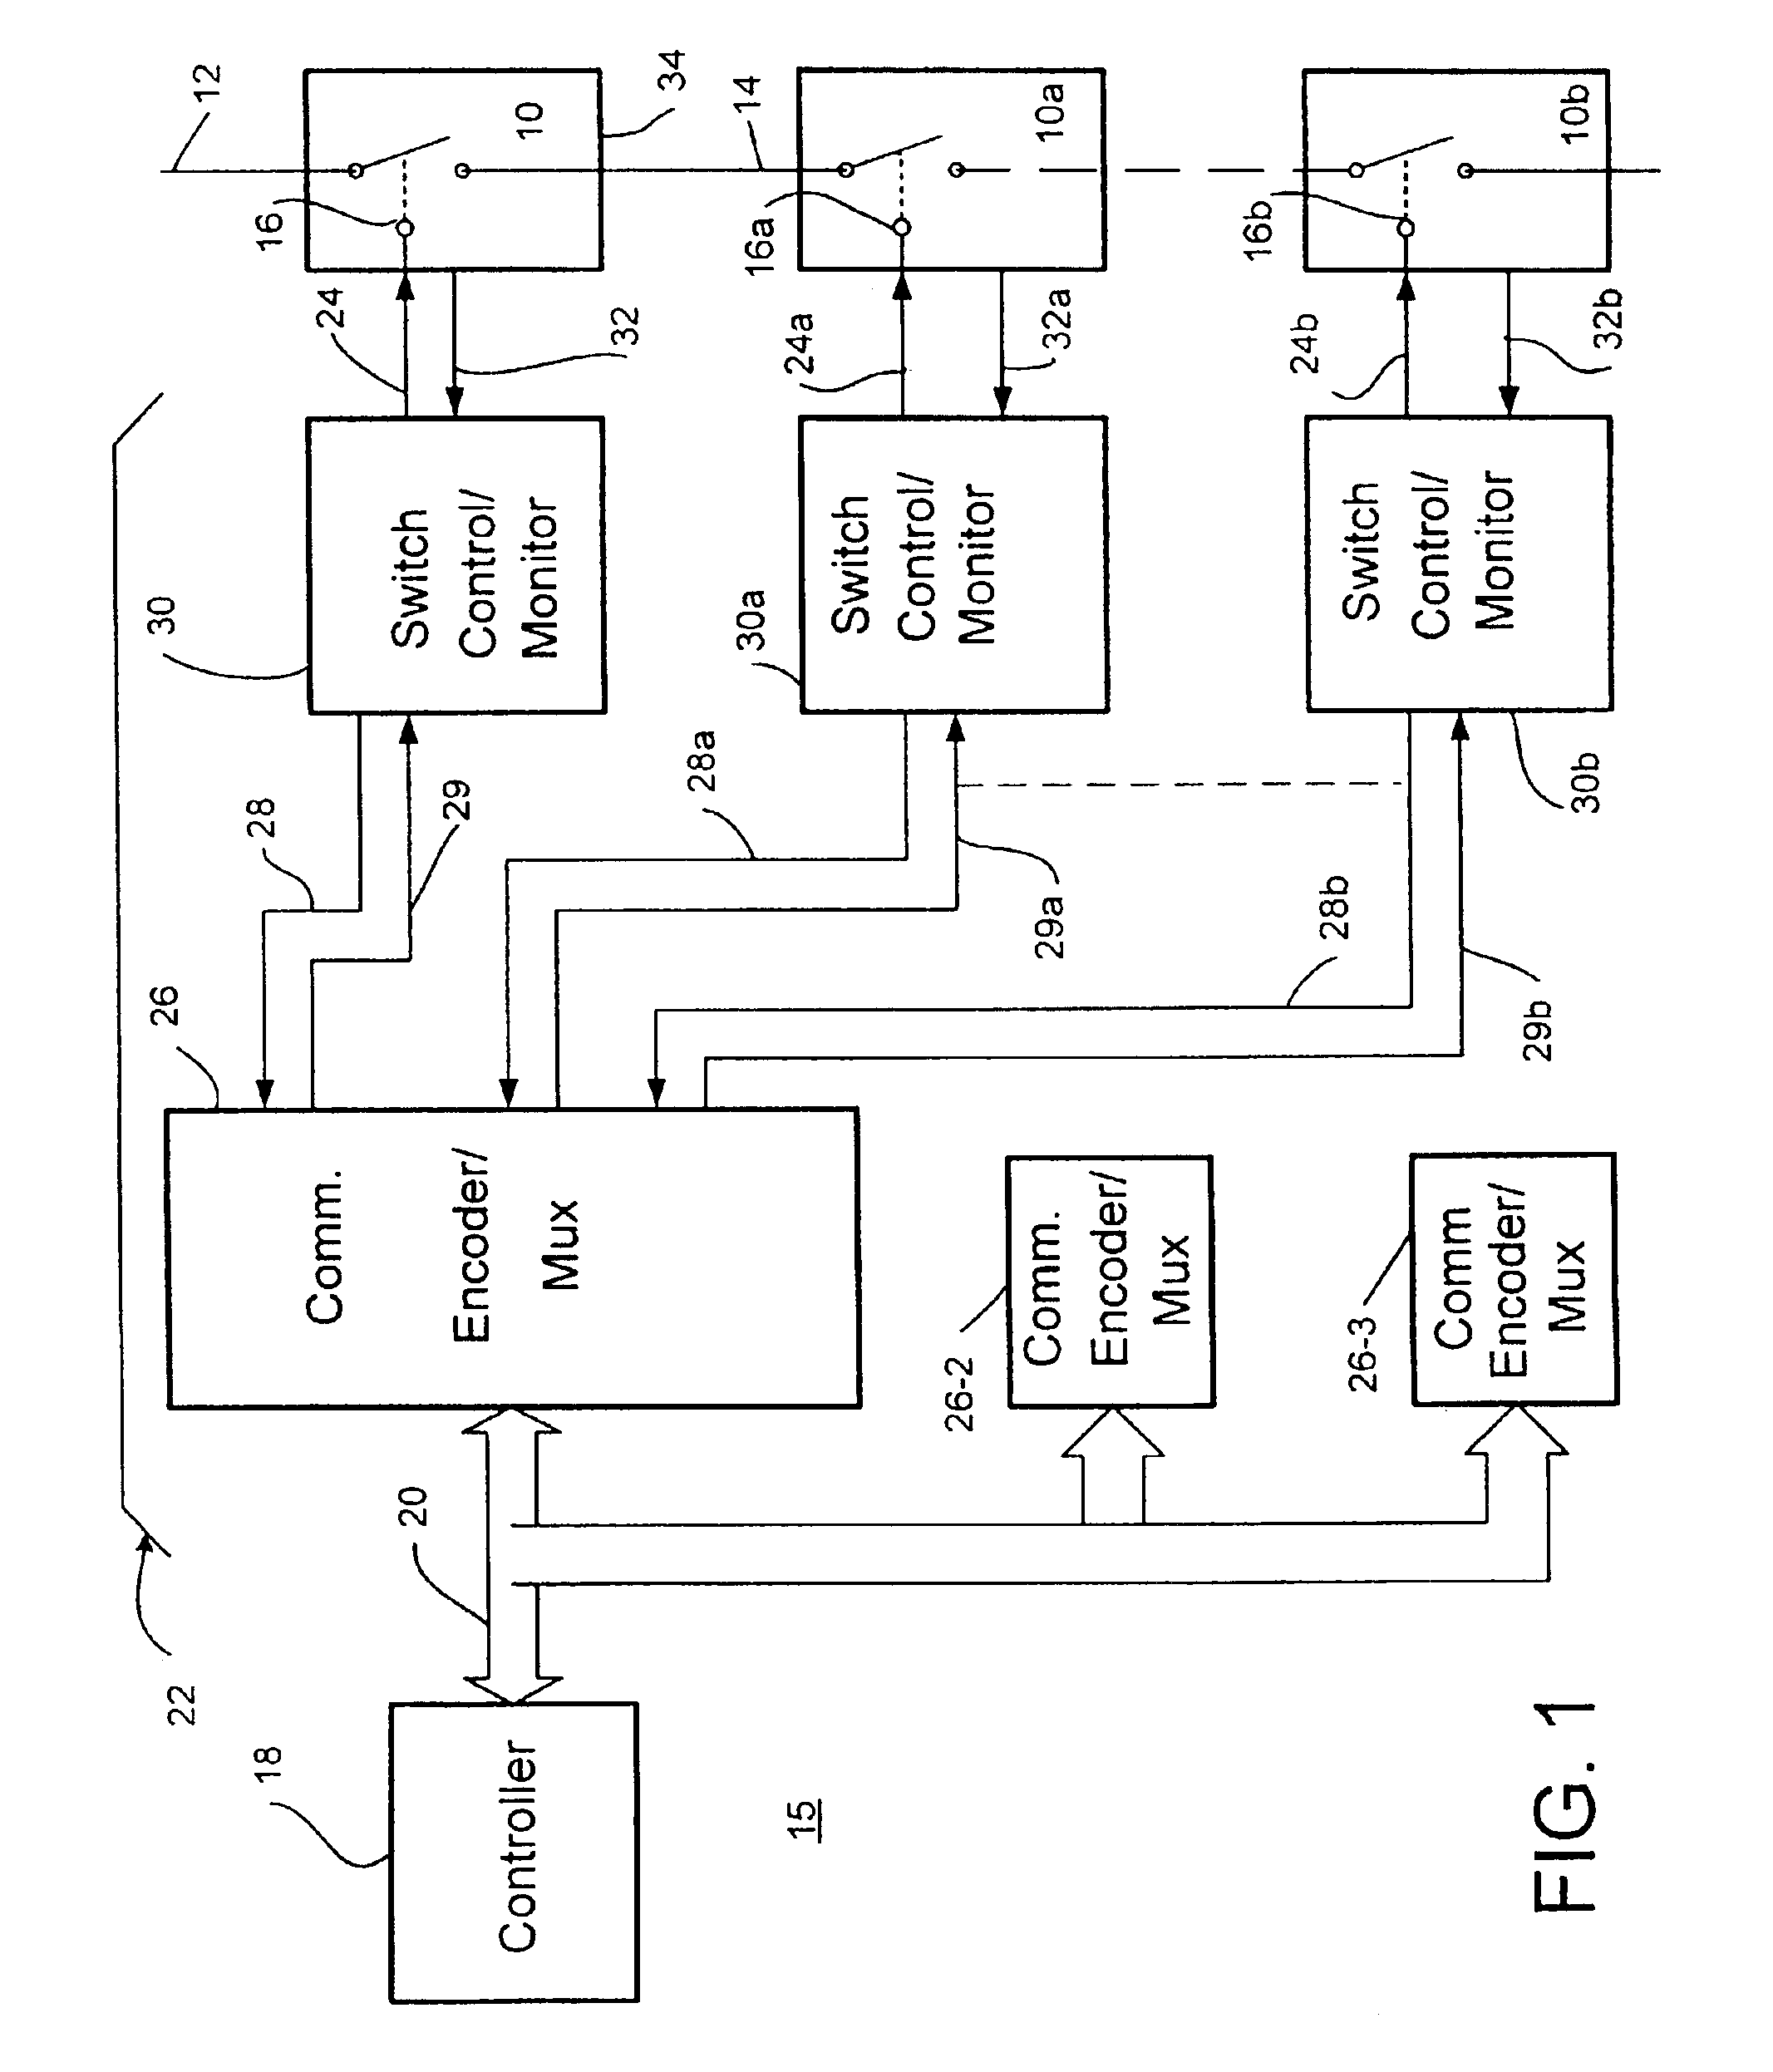 Monitoring and control for power electronic system